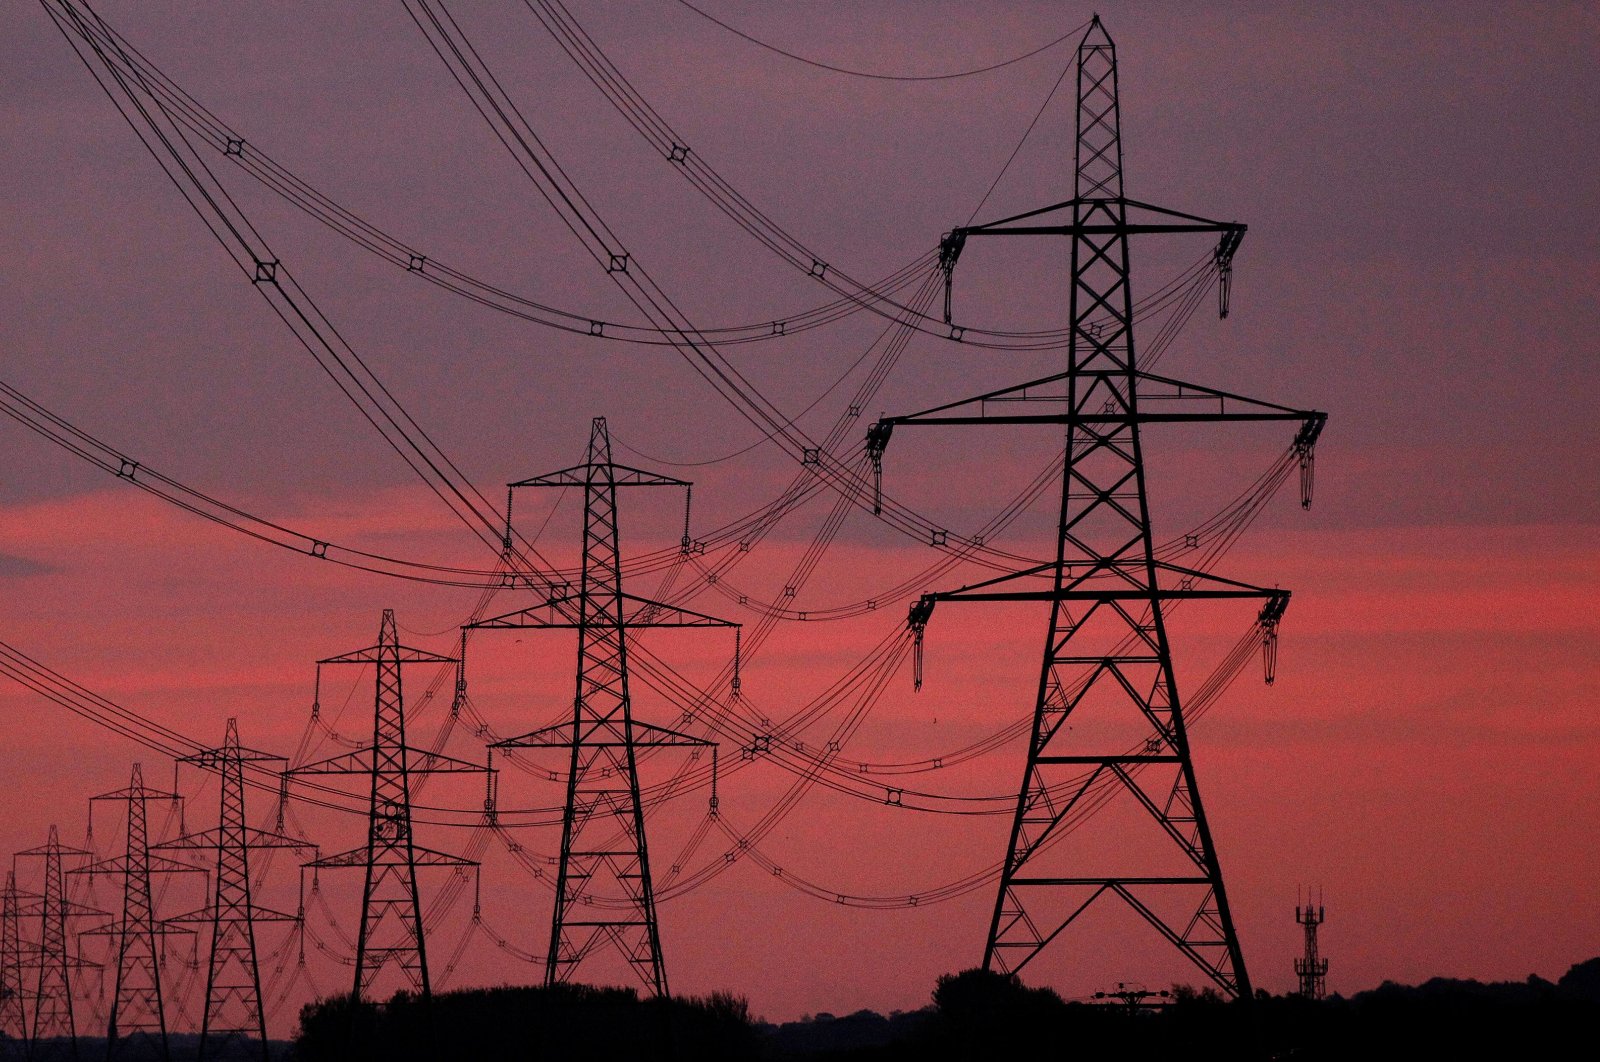 The sun rises behind electricity pylons near Chester, northern England, Oct. 24, 2011. (Reuters Photo)